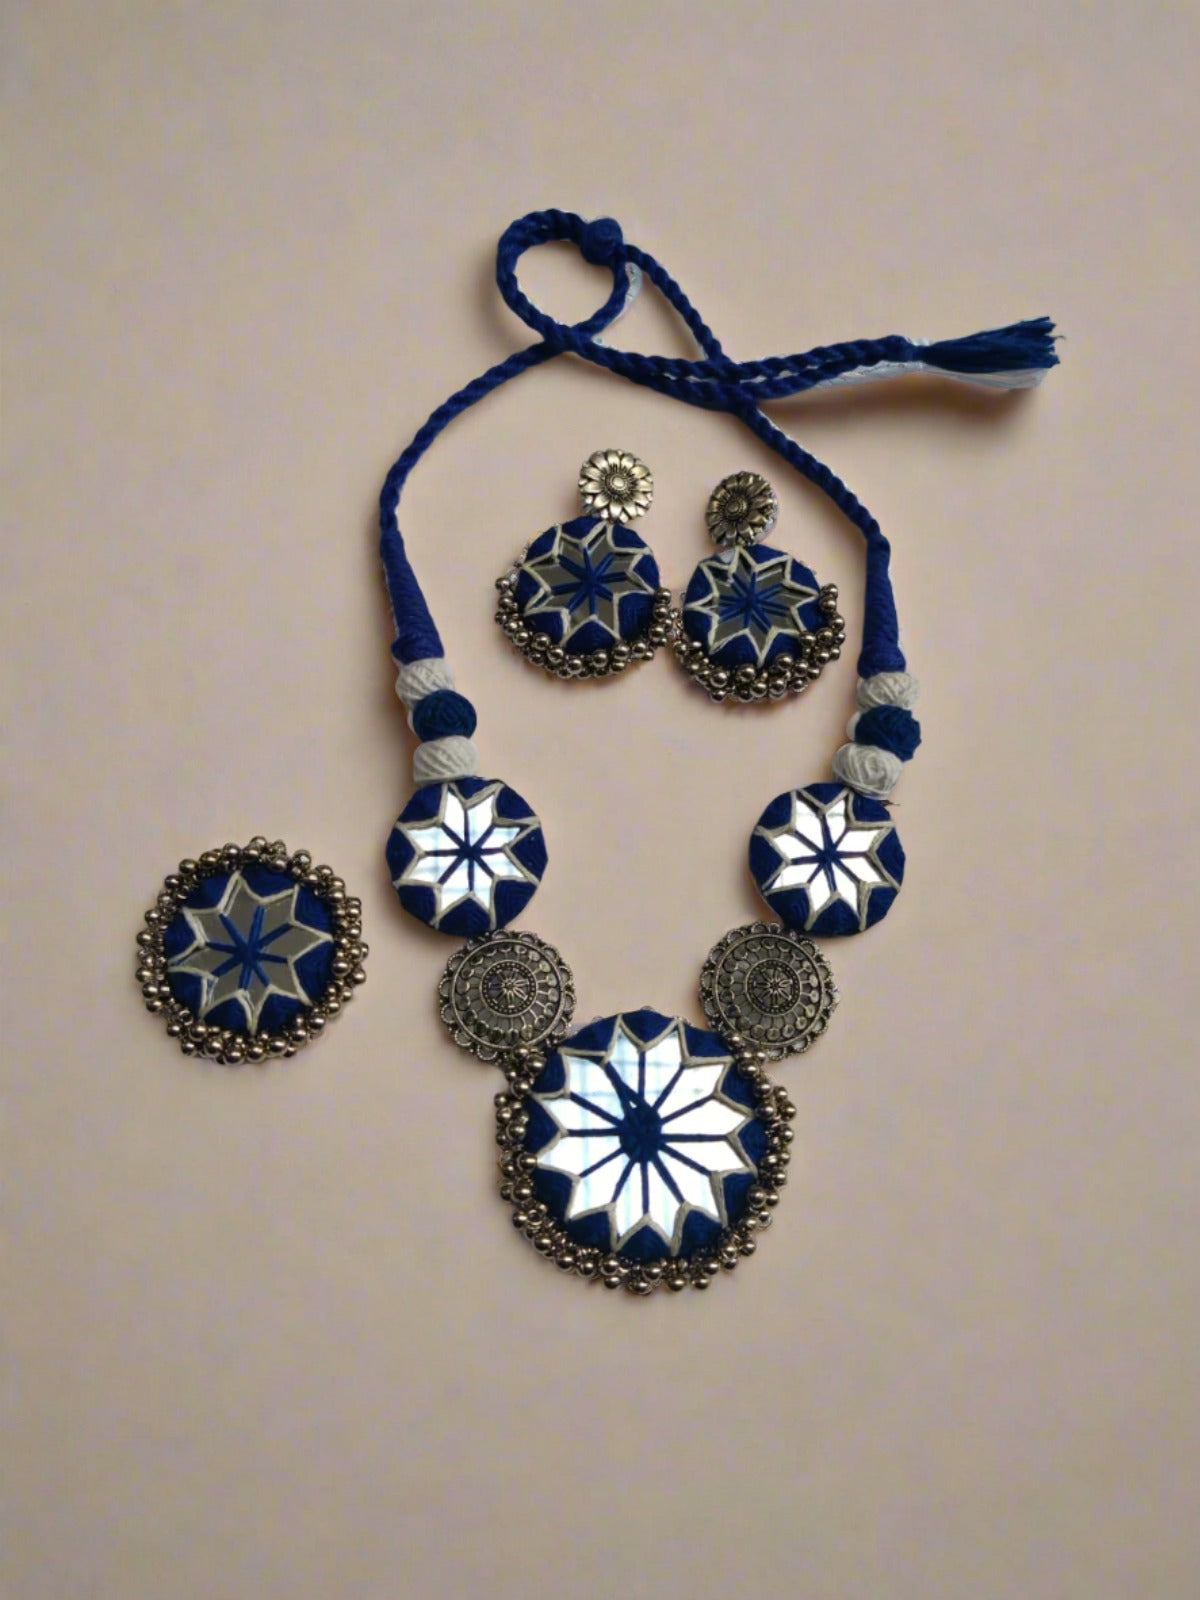 Blue necklace and earrings with mirror and silver charms on white backdrop